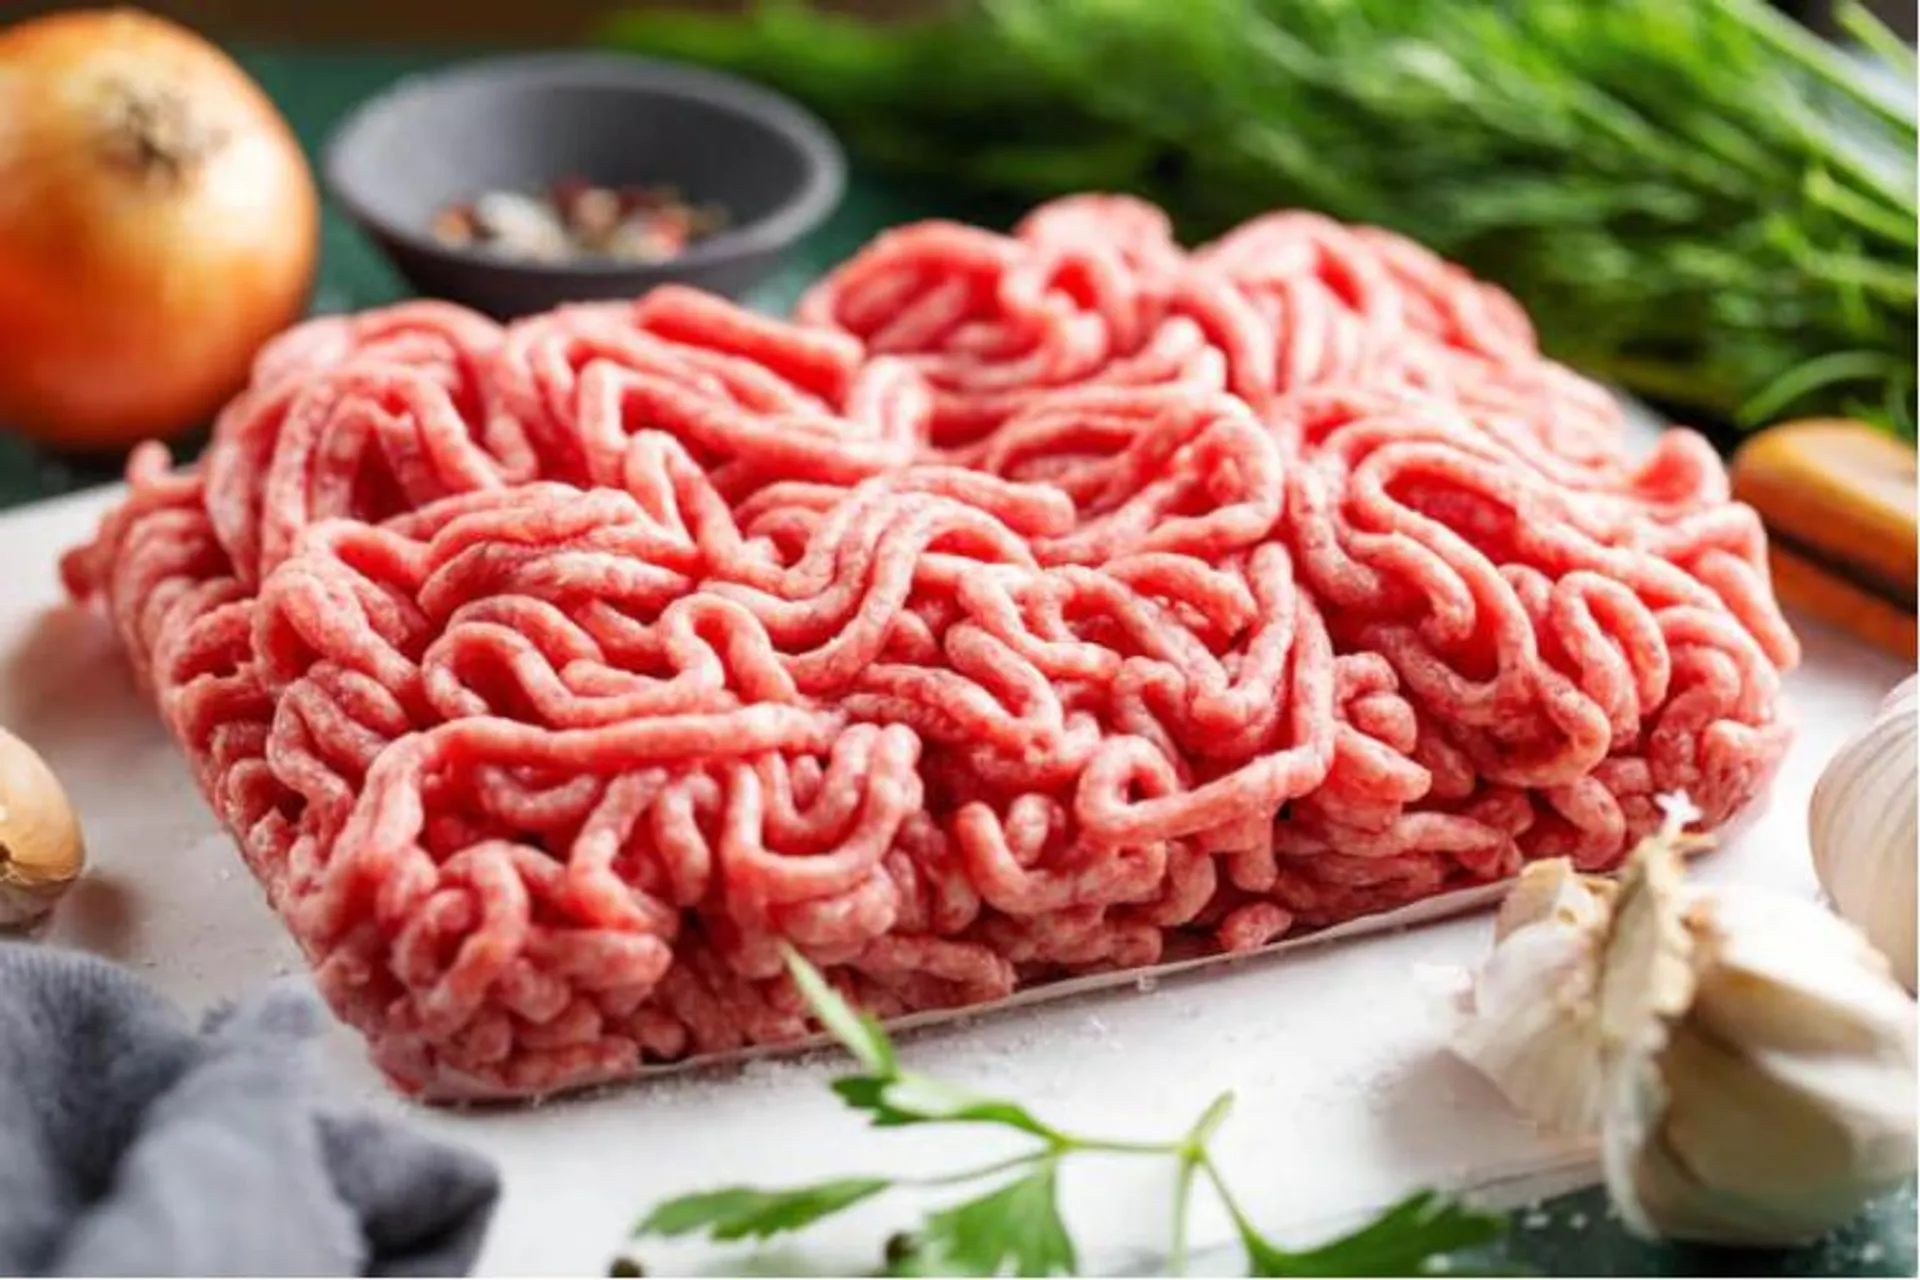 EXTRA LEAN GROUND BEEF, /lb.